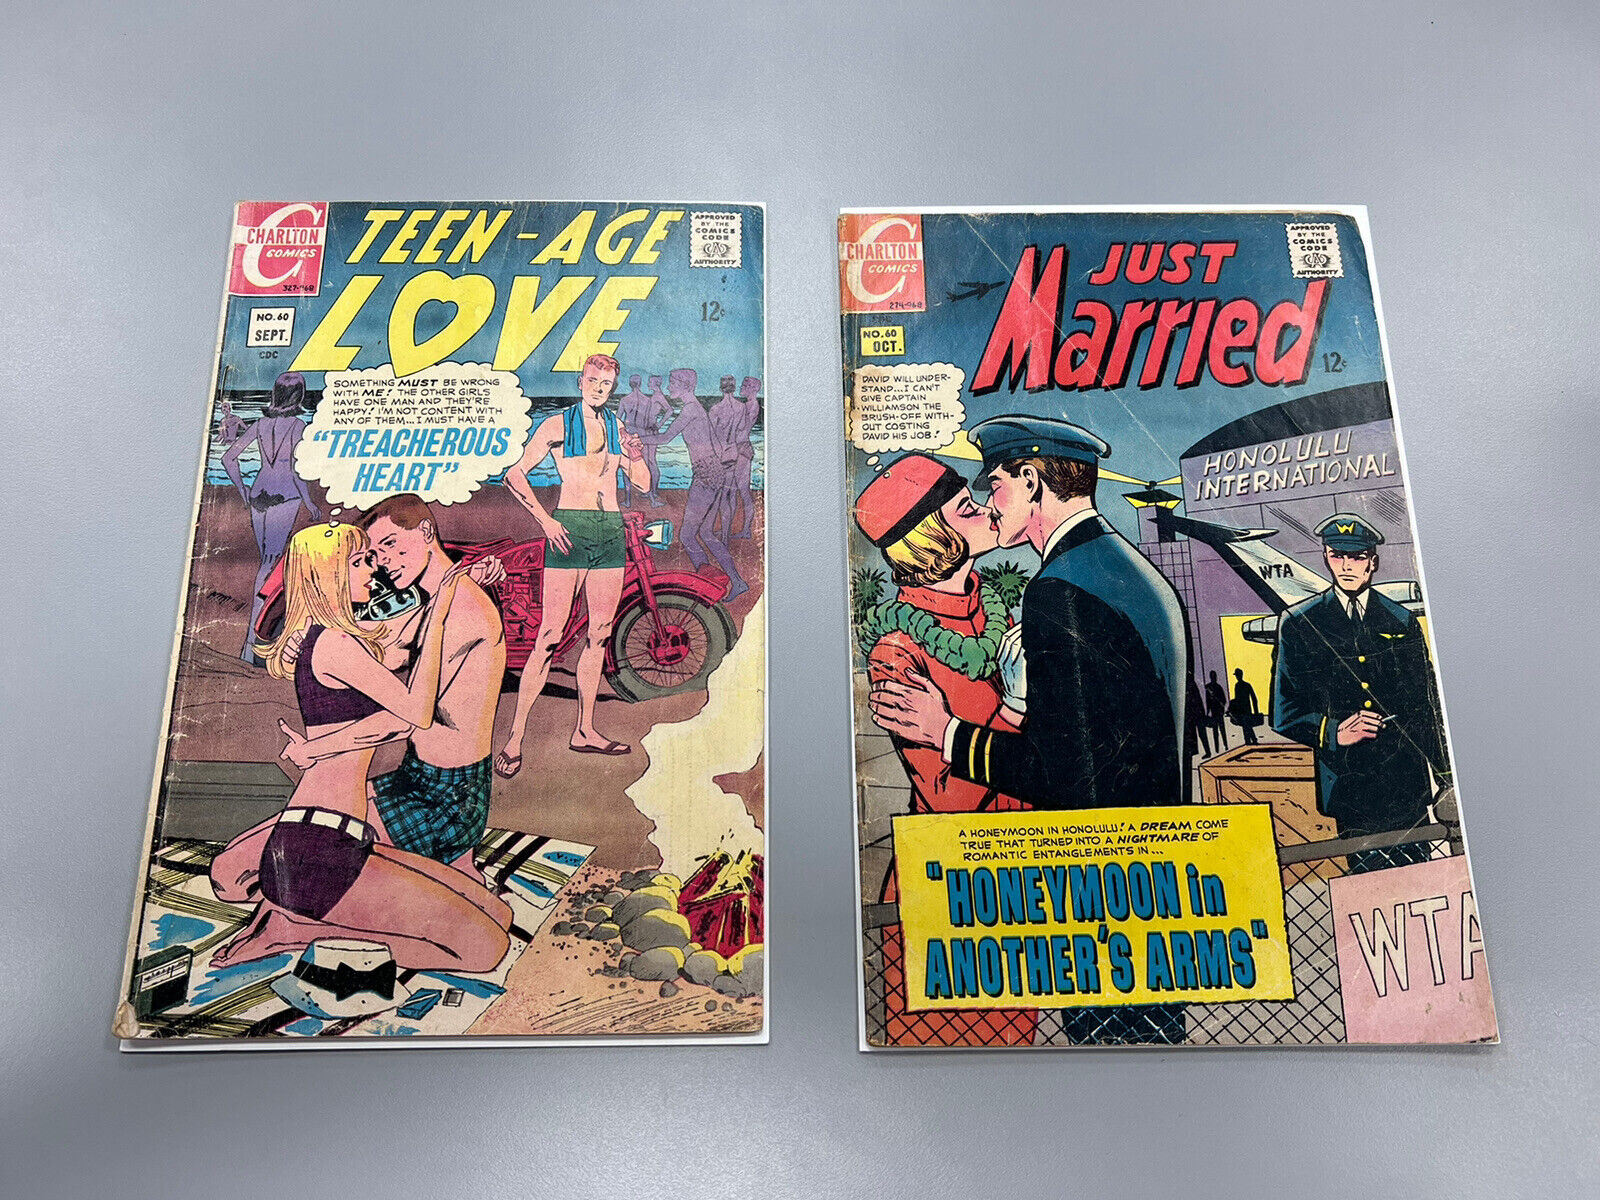 Lot Of 2 -1968 #60 Charlton Comic, Just Married, Teen-Age Love 12c